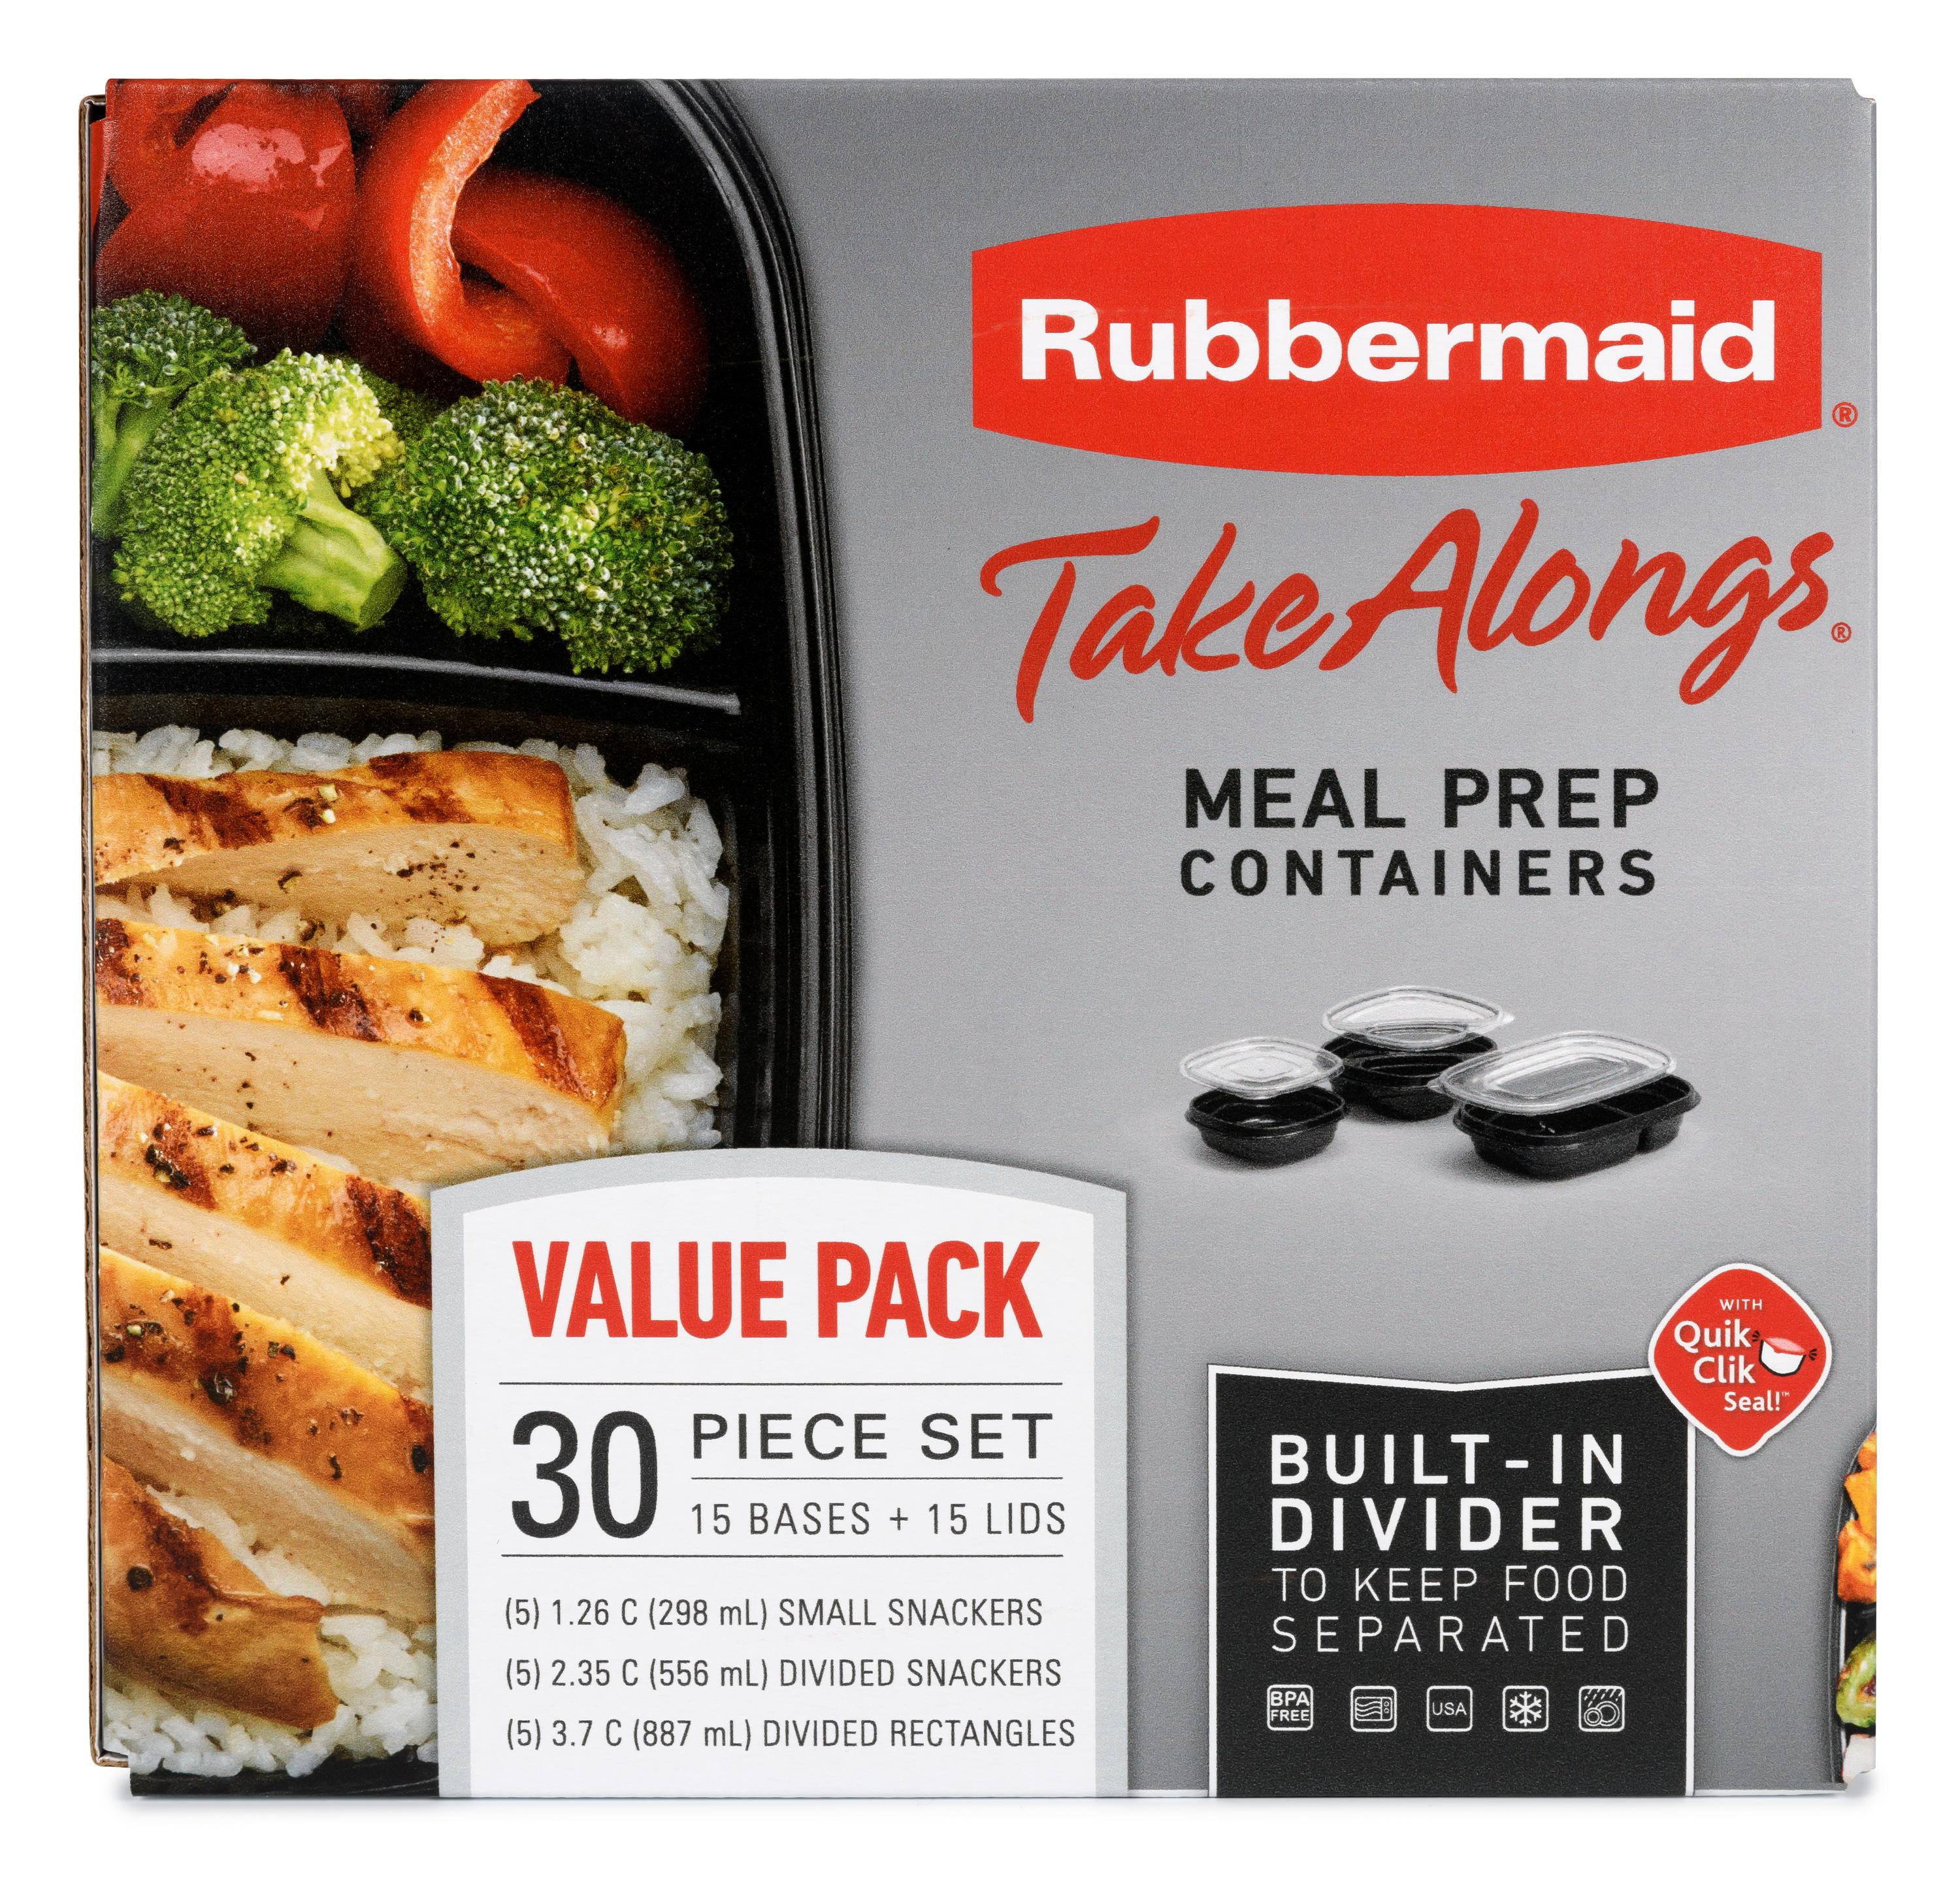 Rubbermaid Take Alongs 2.35 Cups Snackers Meal Prep Containers 5